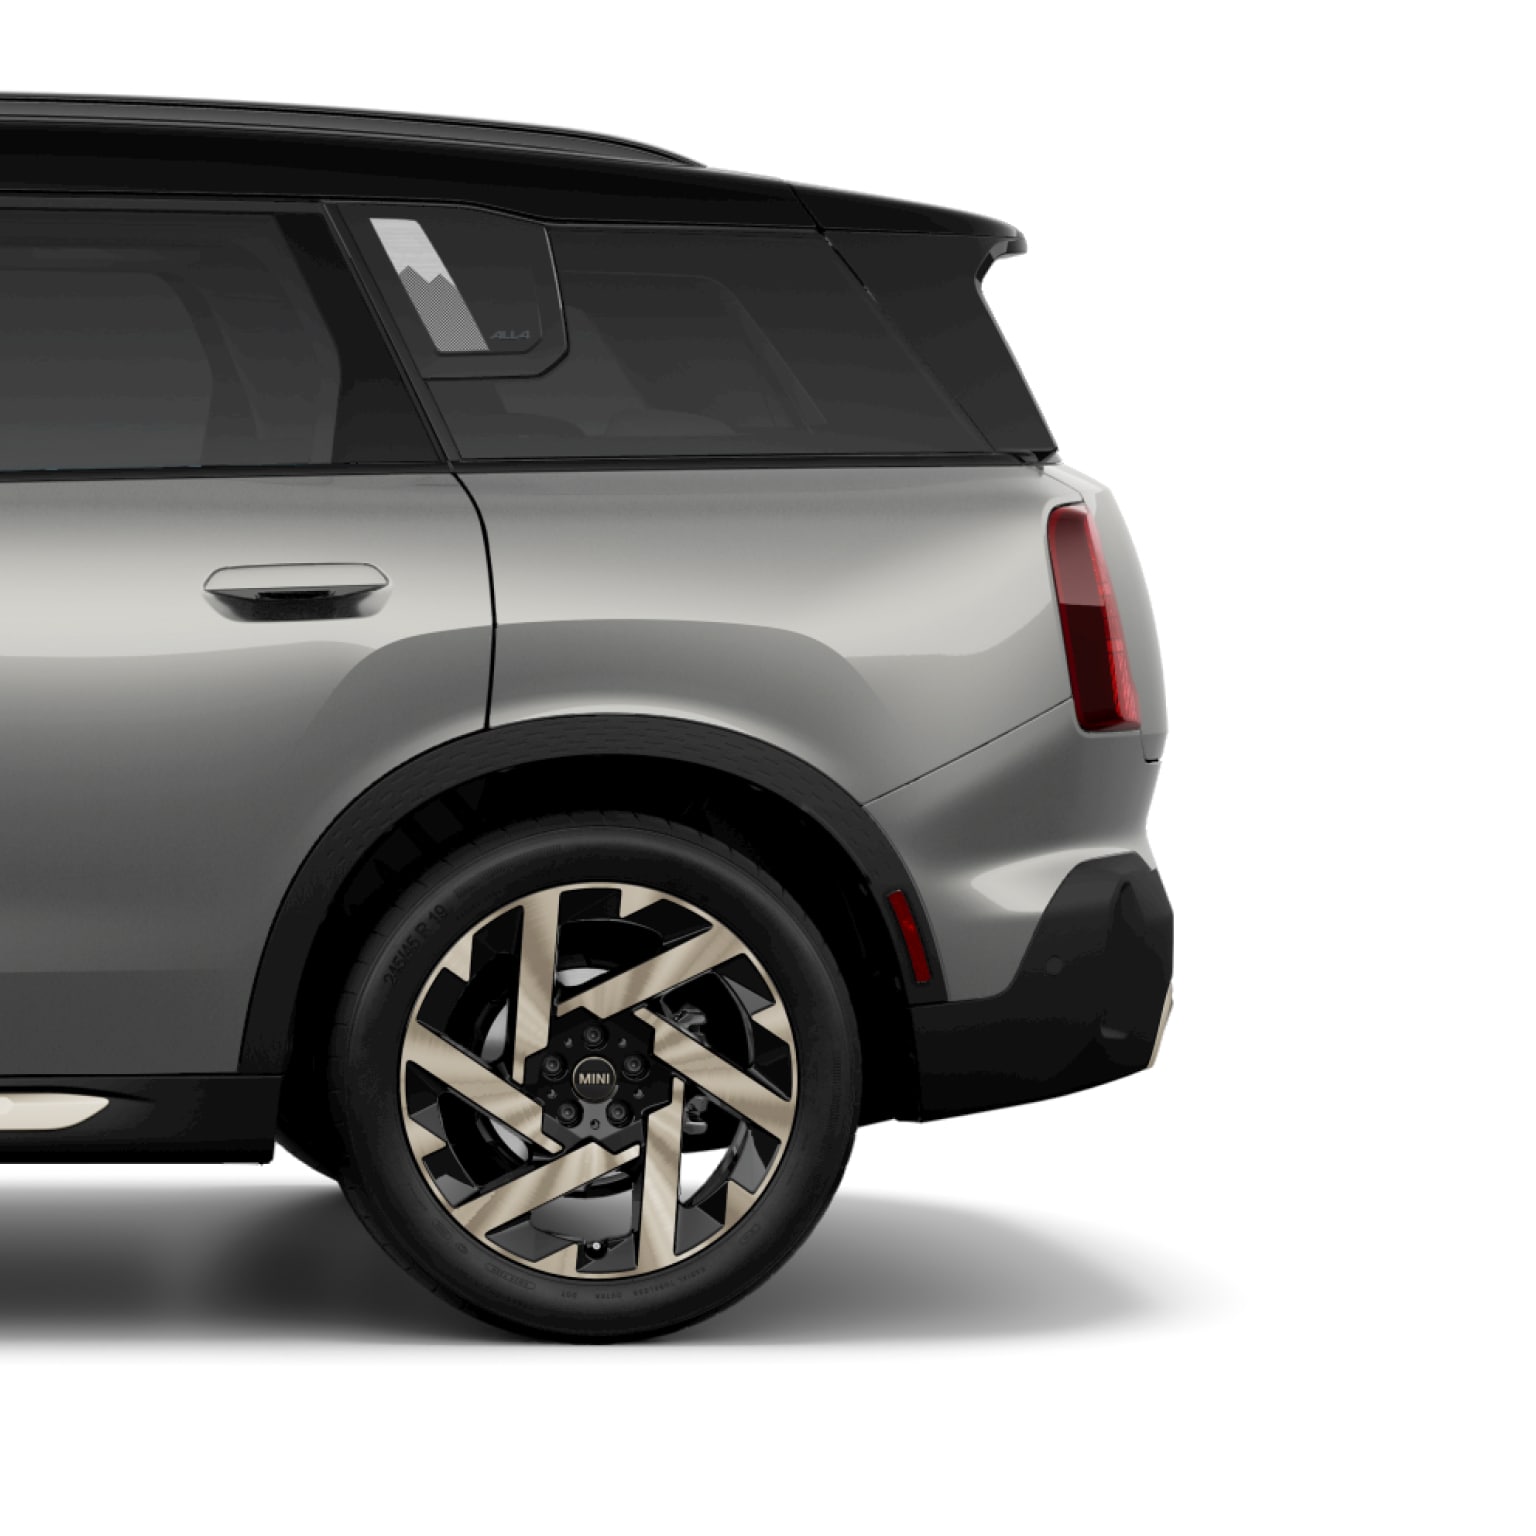 Side view of the rear of a 2025 MINI Countryman S ALL4 in Metallic Silver III, parked on a blank white surface with its shadow underneath it and nothing in the background.